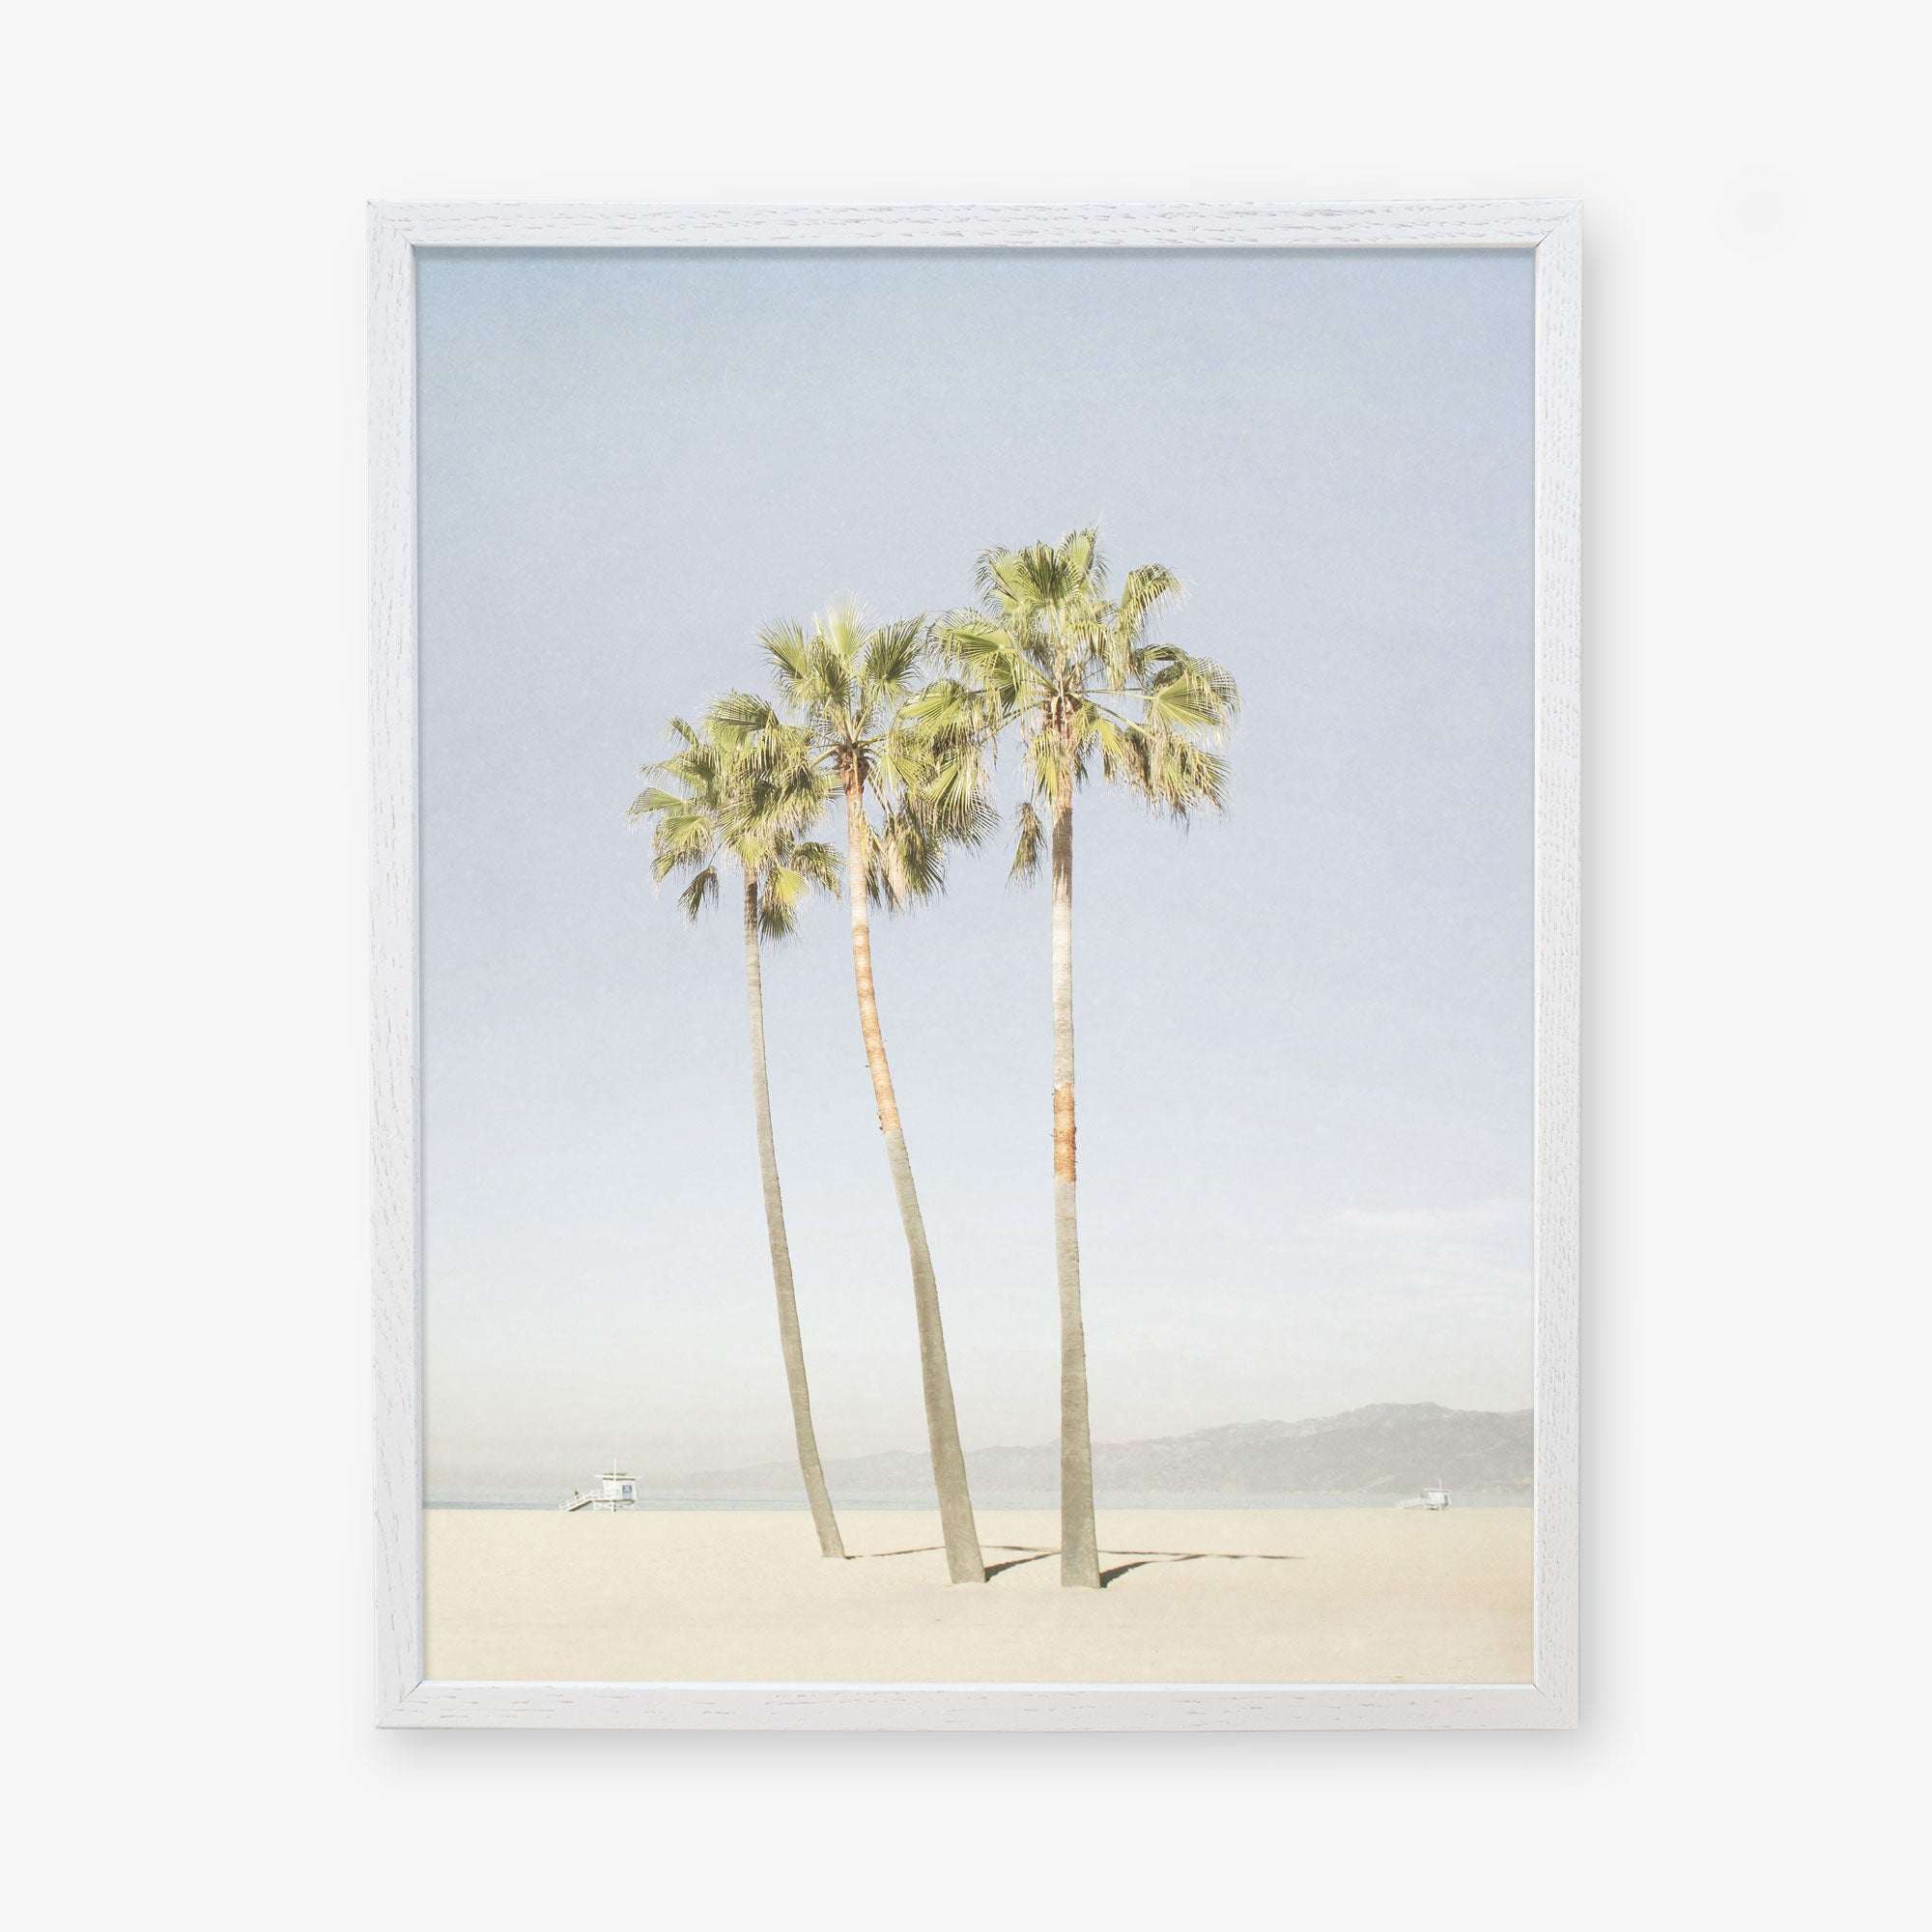 A framed artwork featuring a serene beach scene with four tall palm trees against a clear sky, with distant hills and a subtle hint of a sailboat on the horizon, captured on archival photographic paper. This is the Offley Green California Venice Beach Print, &#39;Three Palms&#39;.